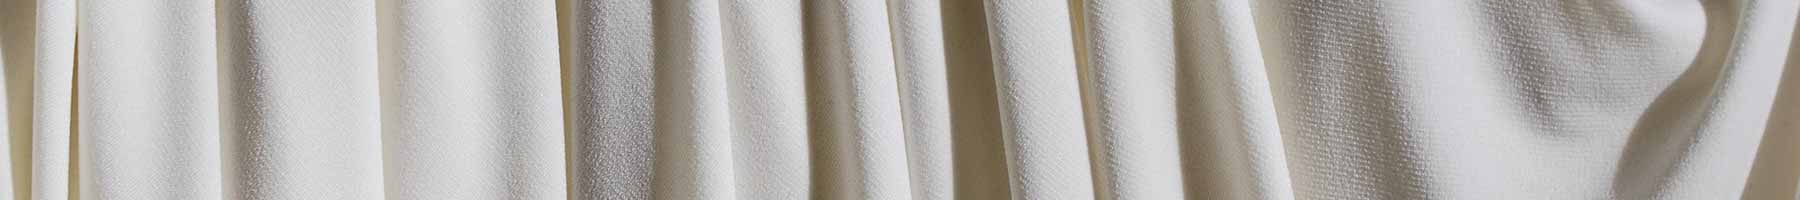 white fabric in folds